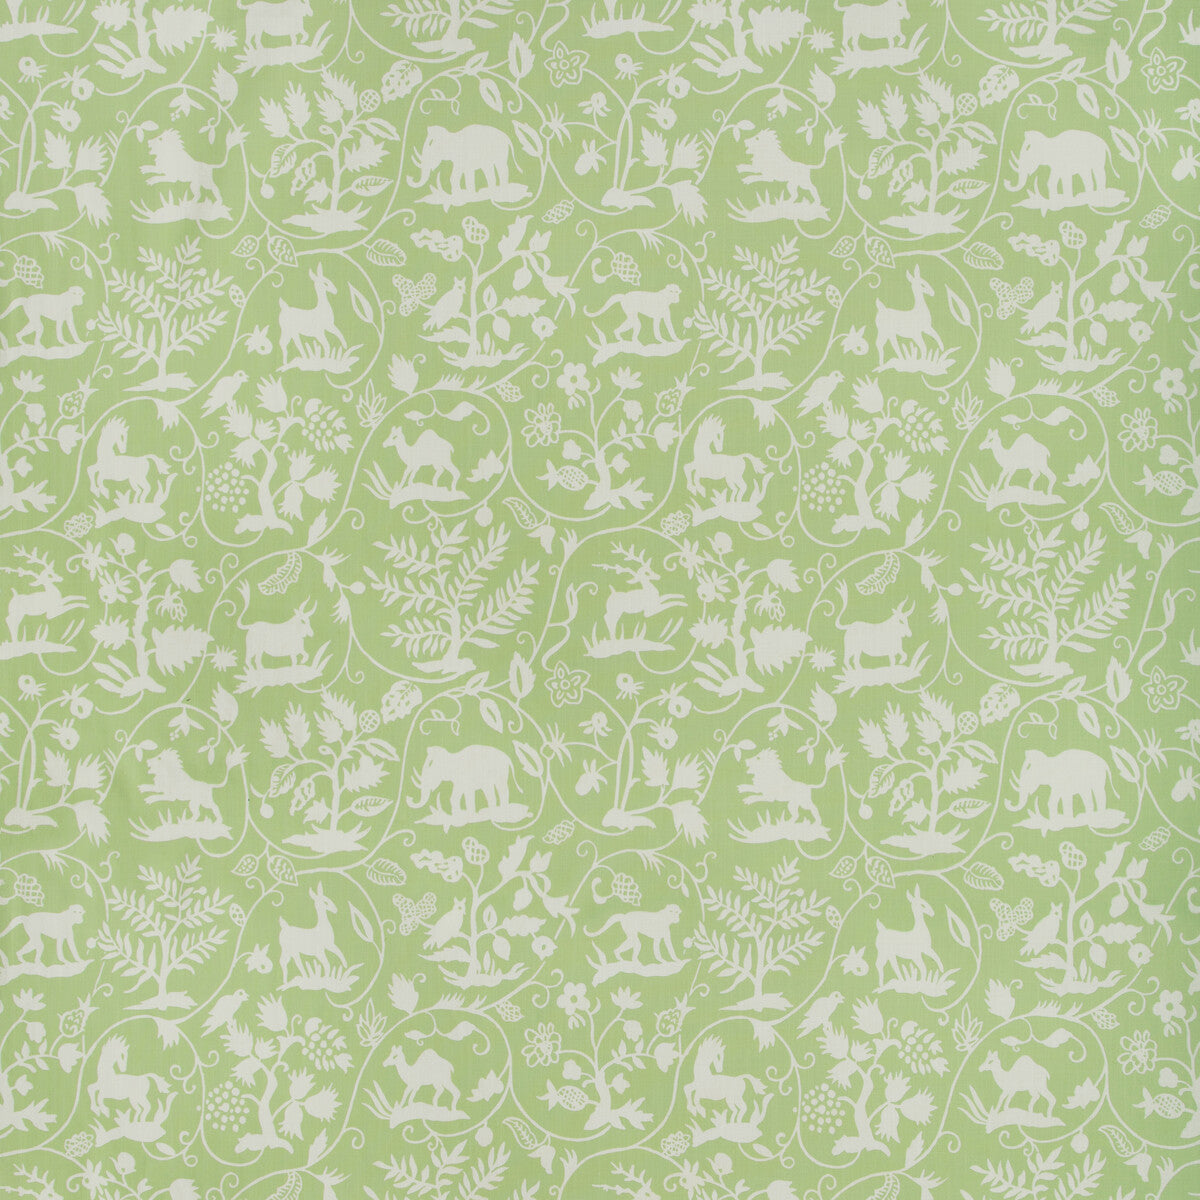 Animaltale fabric in apple color - pattern ANIMALTALE.13.0 - by Kravet Basics in the Bermuda collection